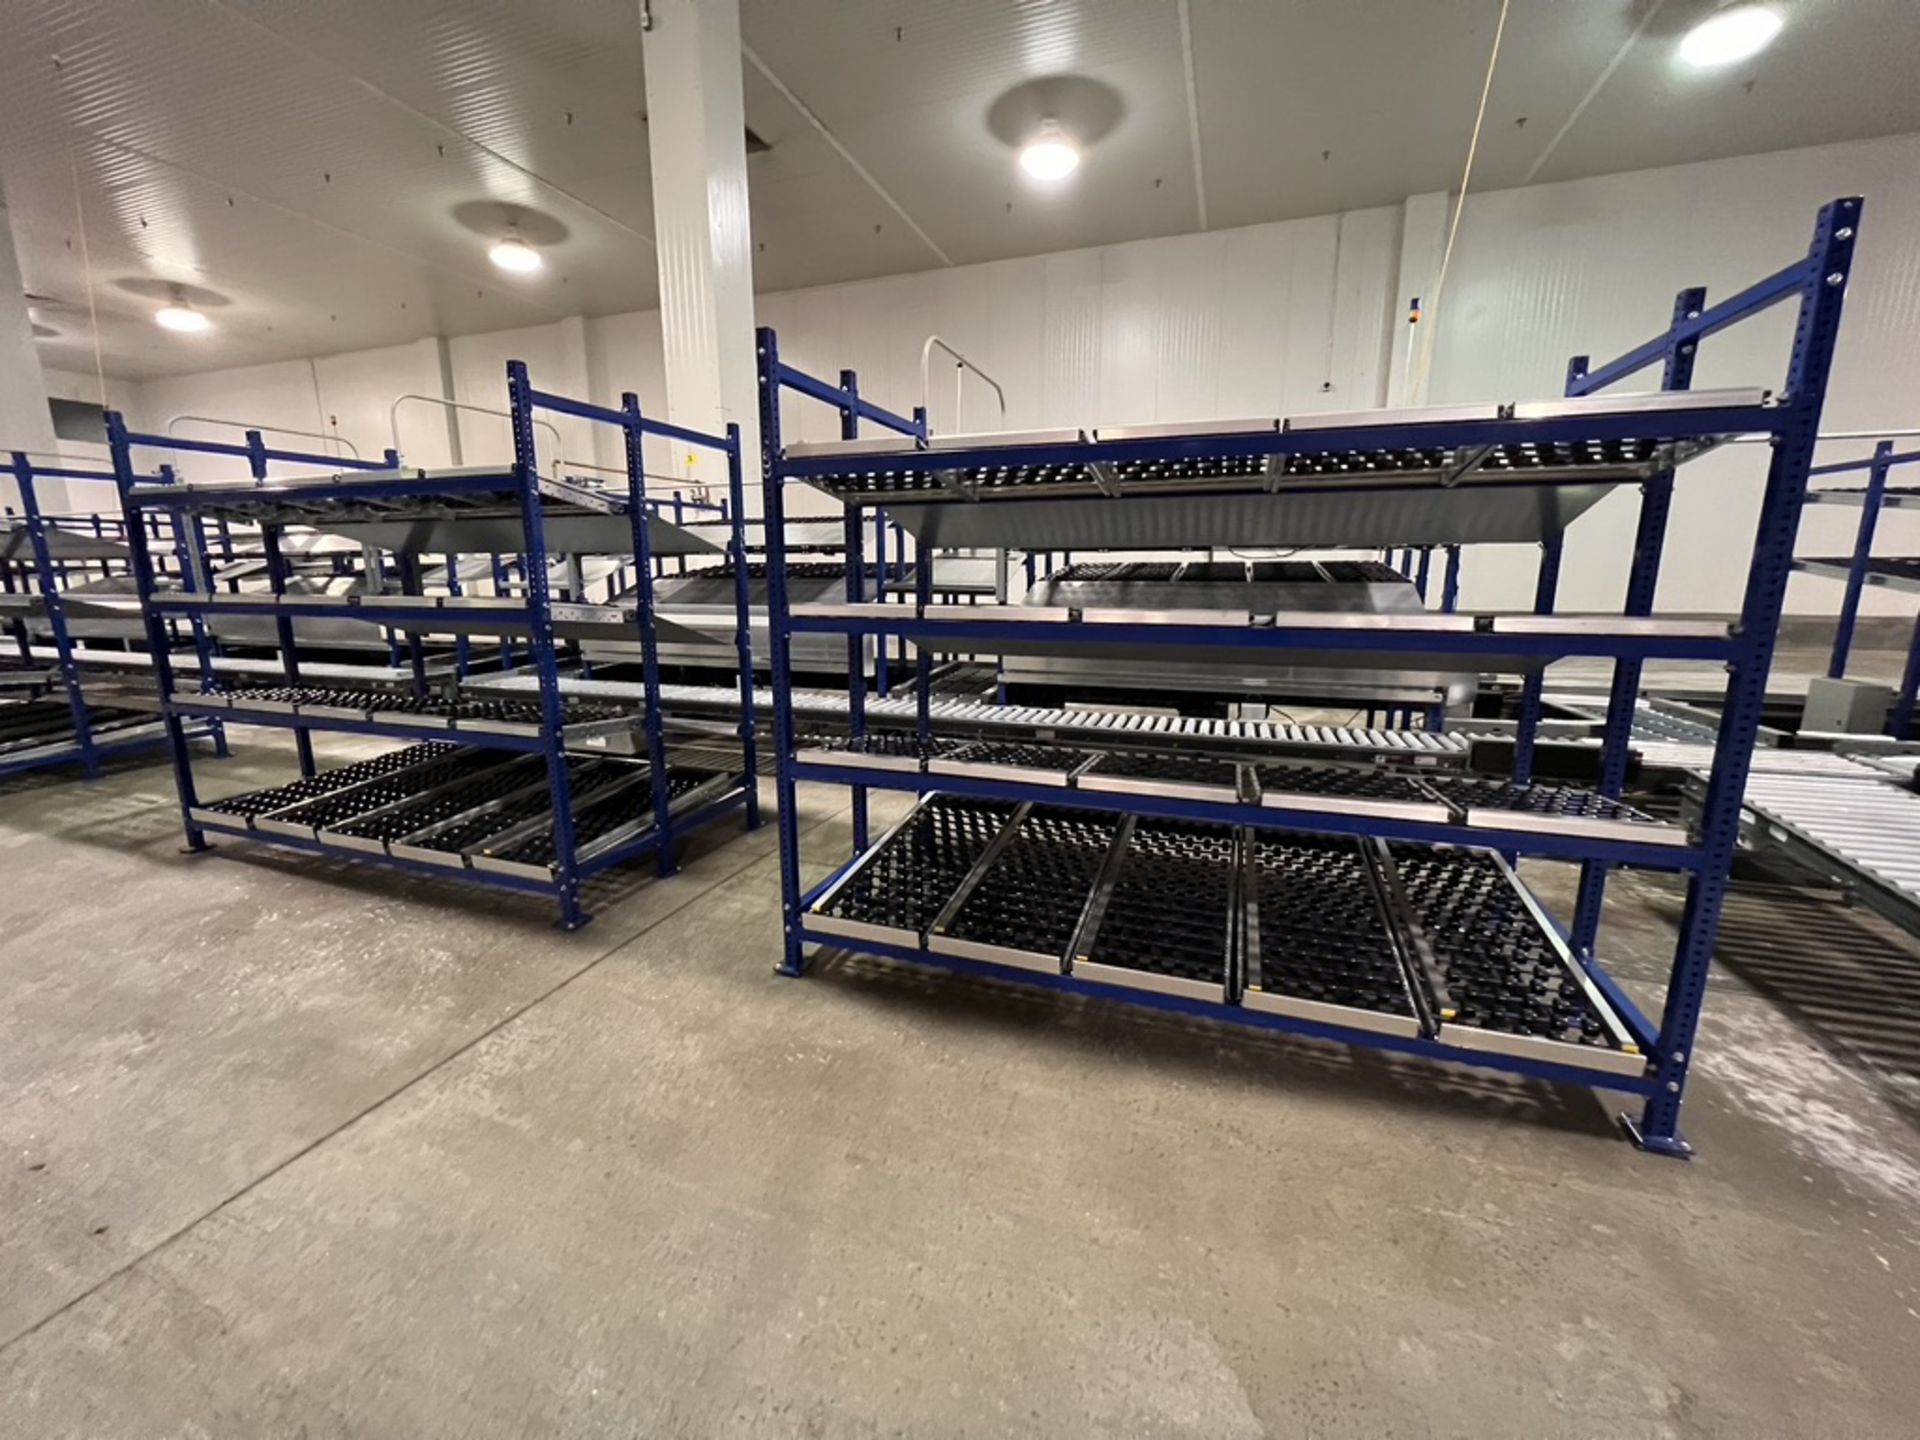 (4) UNEX SPAN TRACK PRODUCT PACK-OFF RACKS, WITH ROLLER CONVEYOR (SUBJECT TO BULK BID IN LOT 11A) - Image 6 of 6